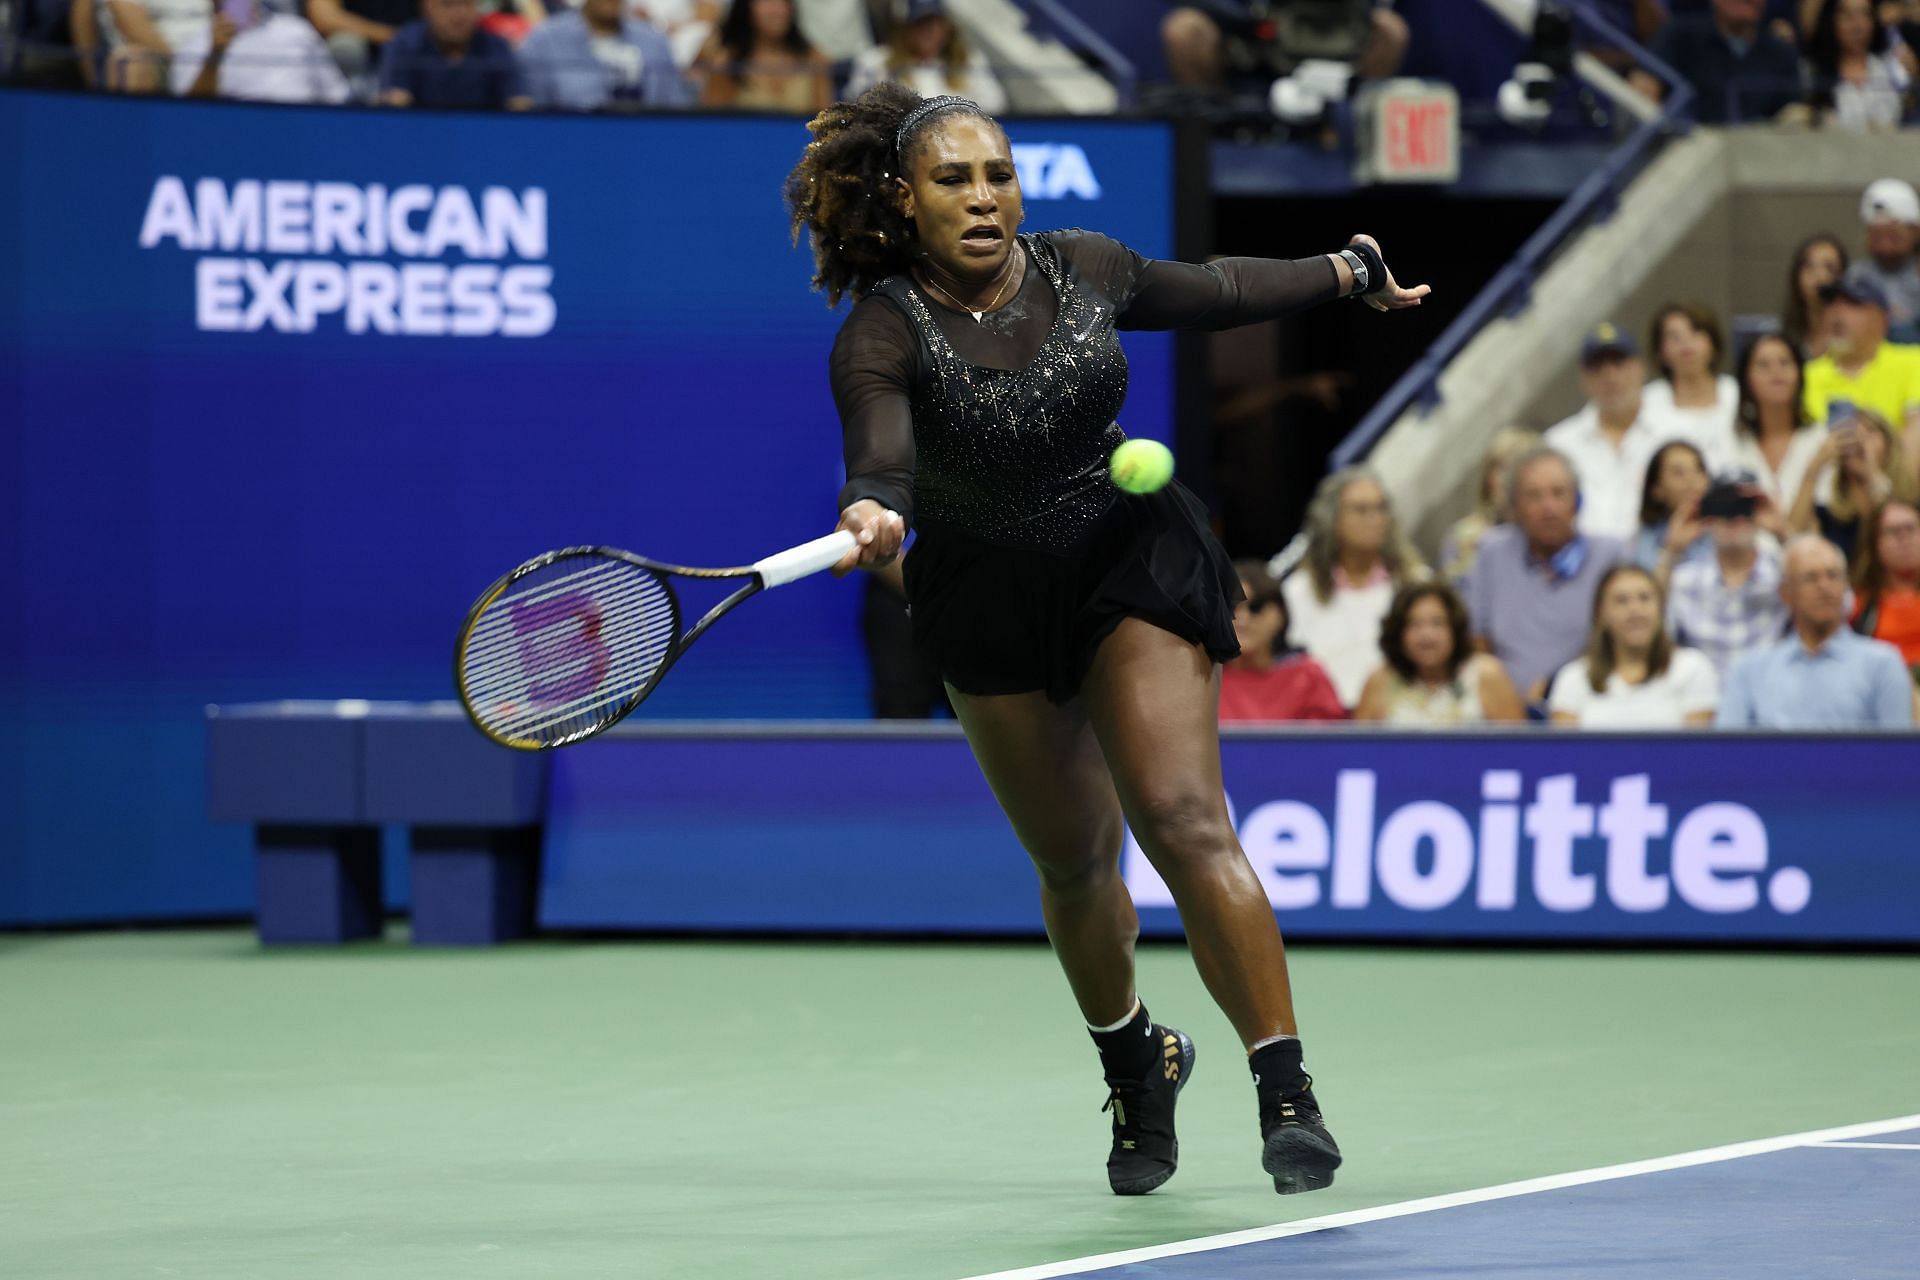 Serena Williams in action at US Open 2022